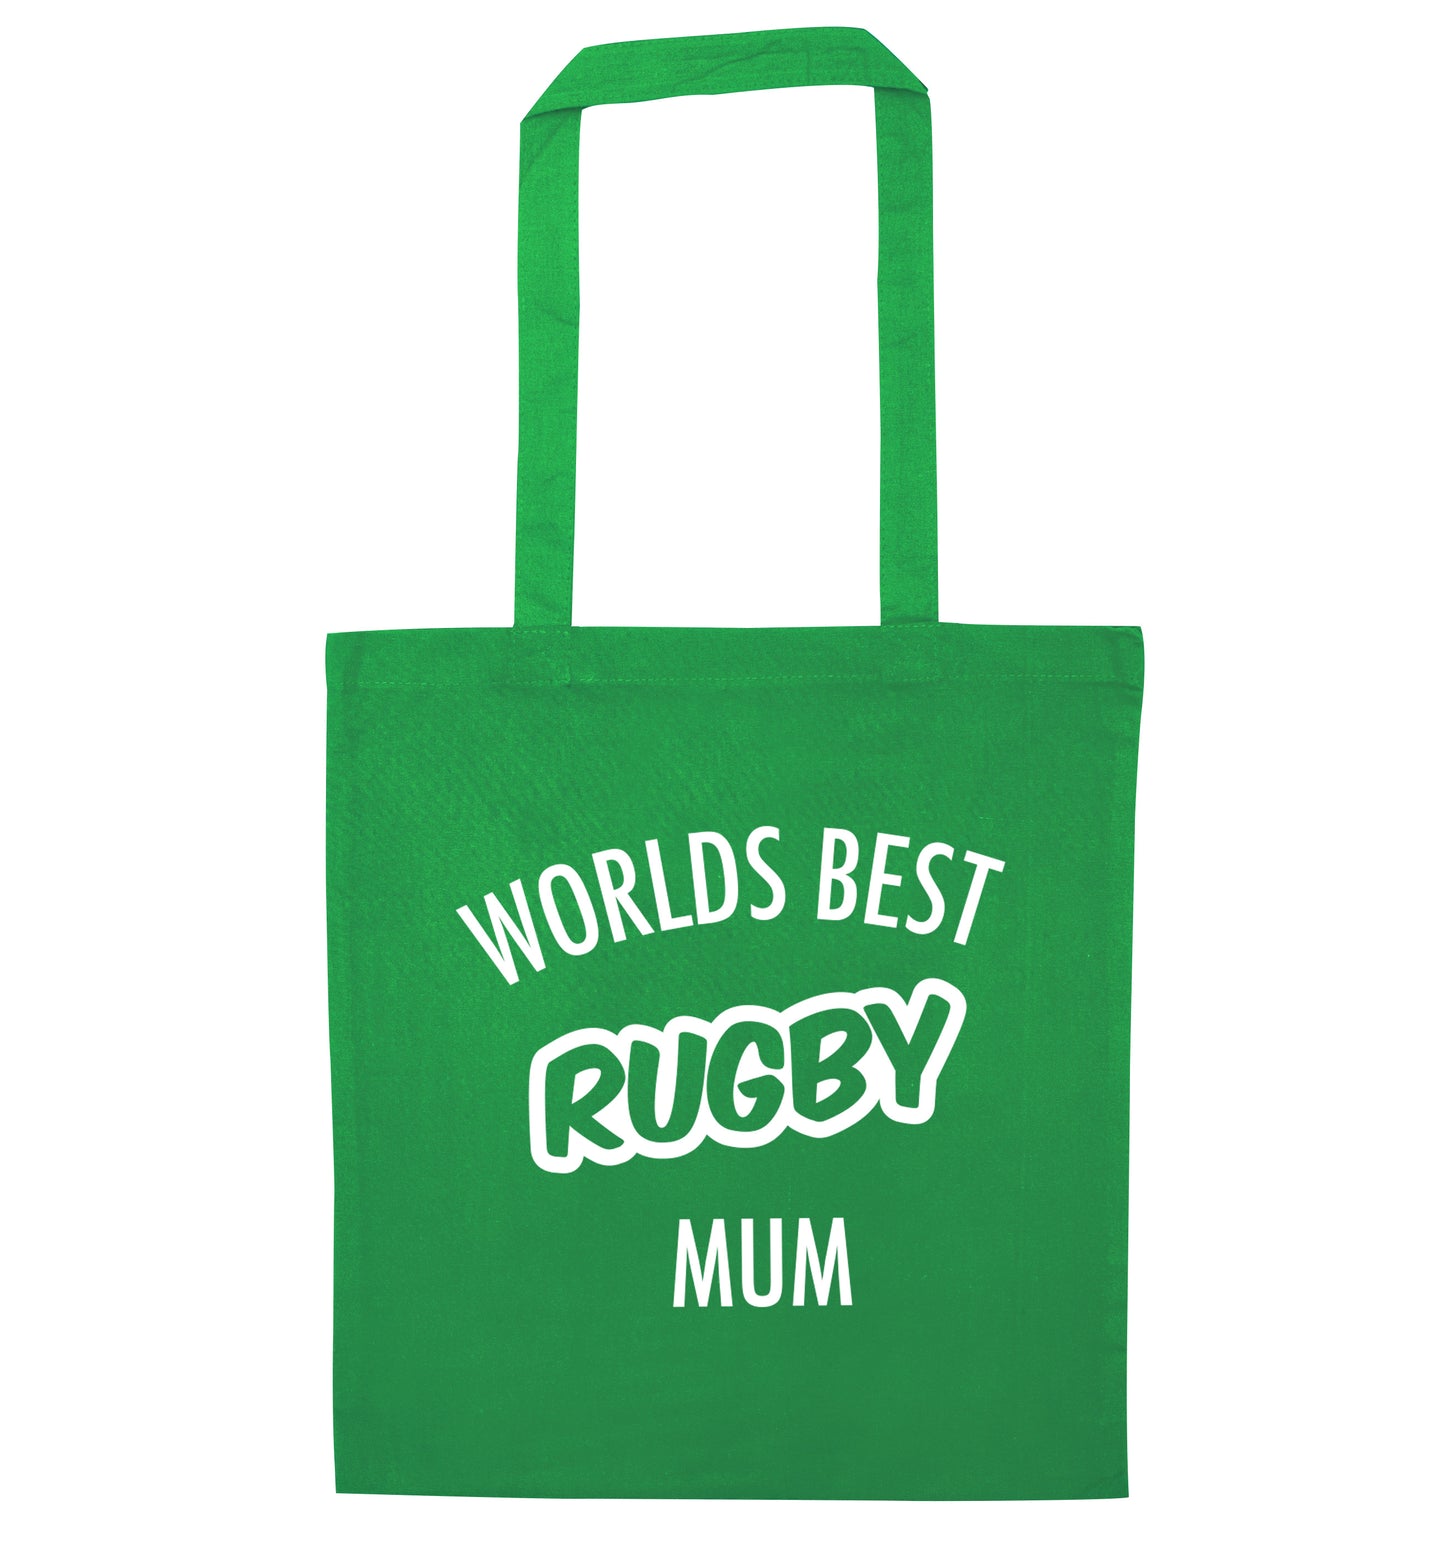 Worlds best rugby mum green tote bag